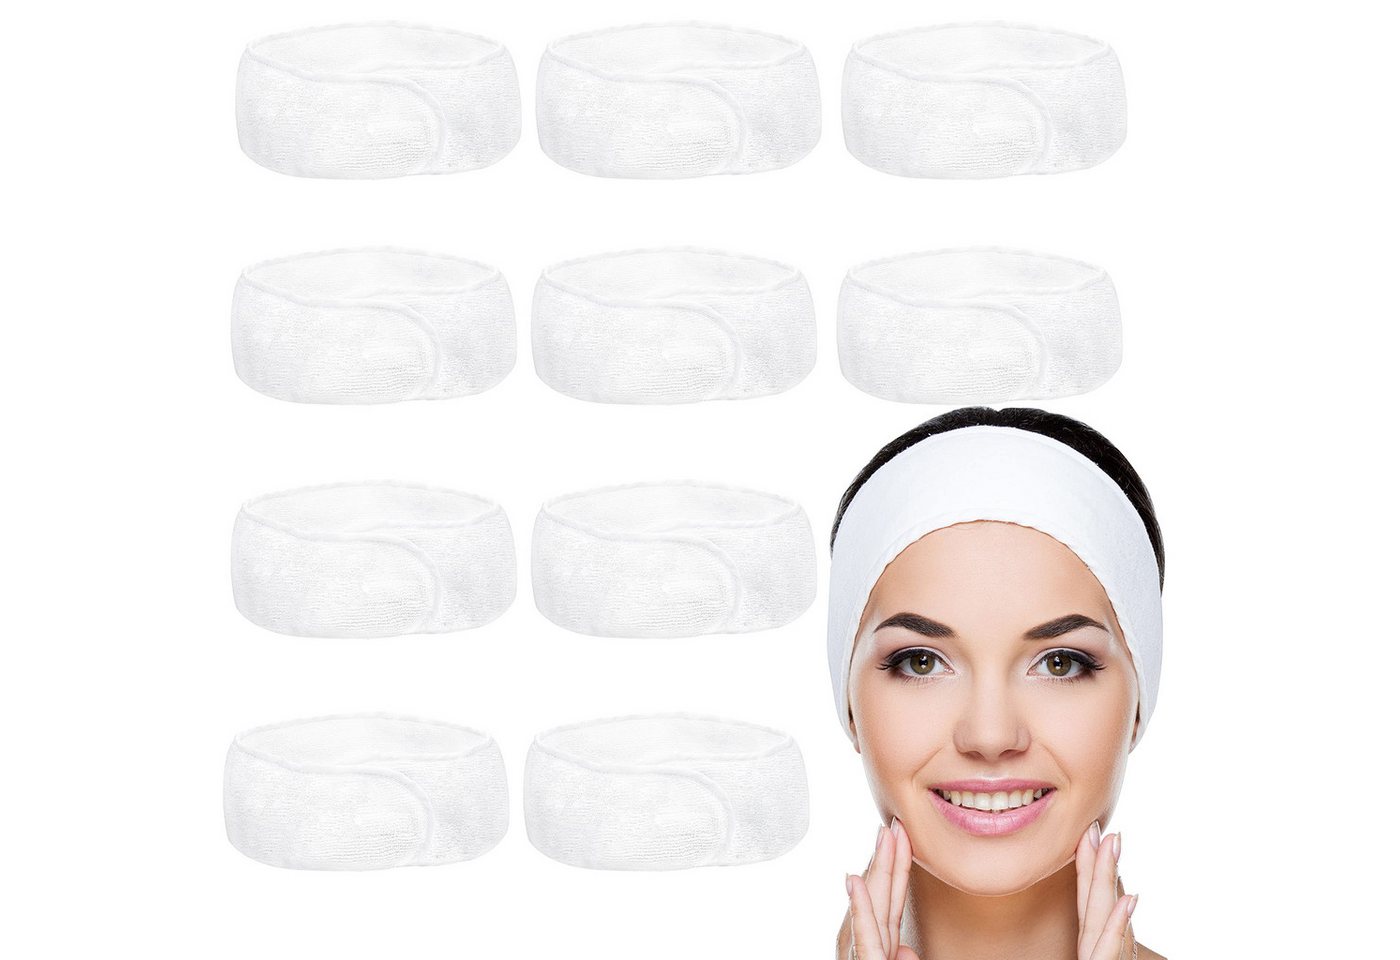 Belle Vous Haarband White Terry Cloth Headband - 10 Hairbands for Makeup, 1-tlg., White Terry Cloth Headband - 10 Hairbands von Belle Vous